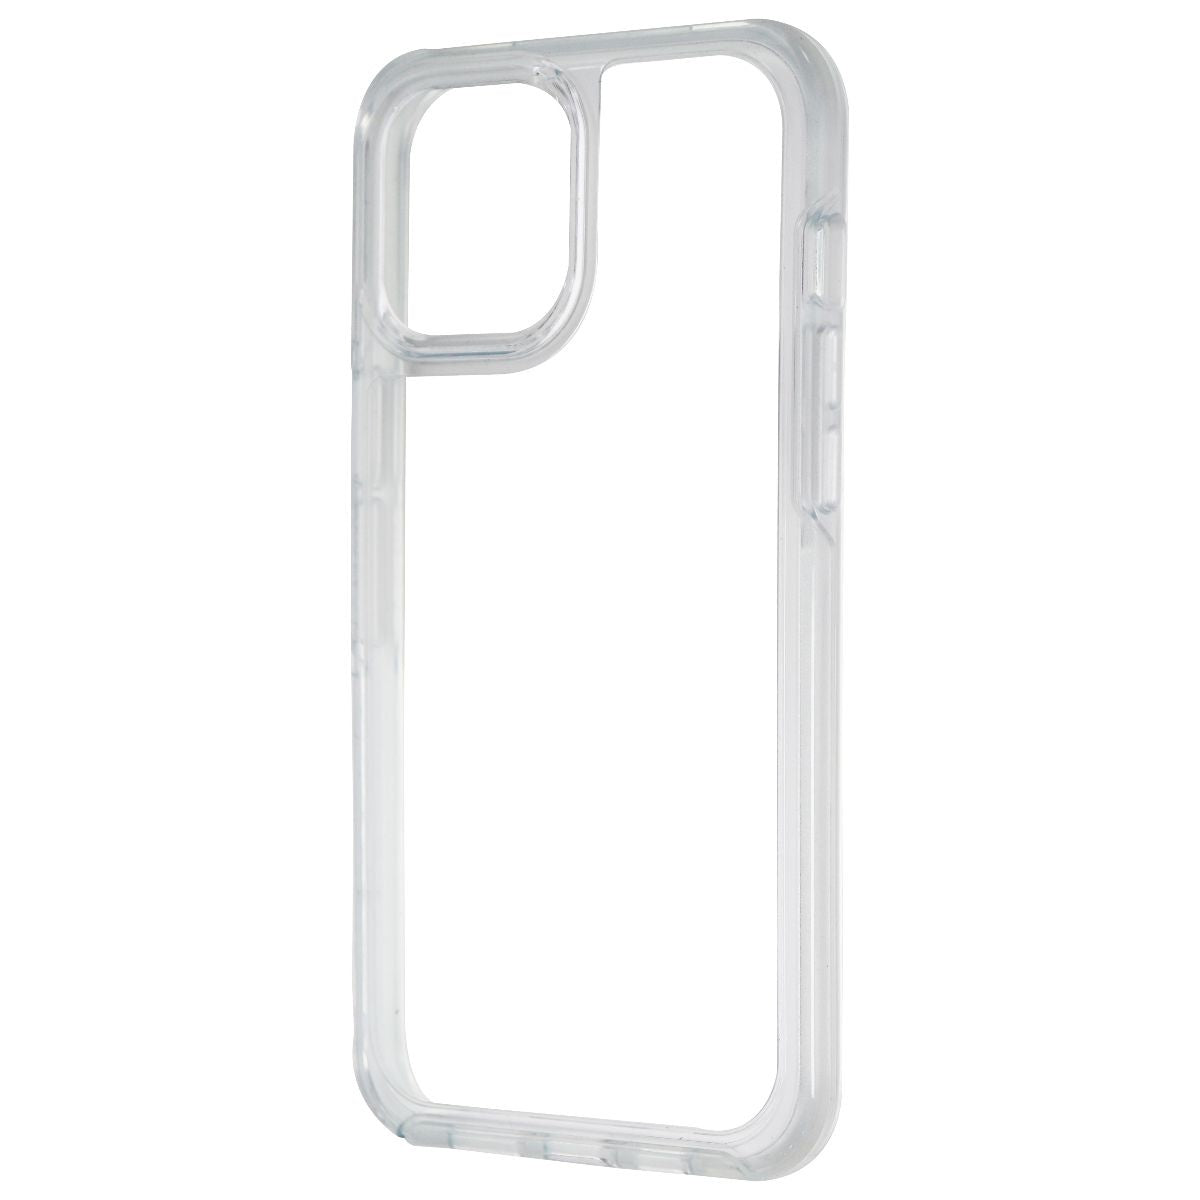 OtterBox Symmetry Series Hybrid Case for Apple iPhone 12 Pro Max - Clear